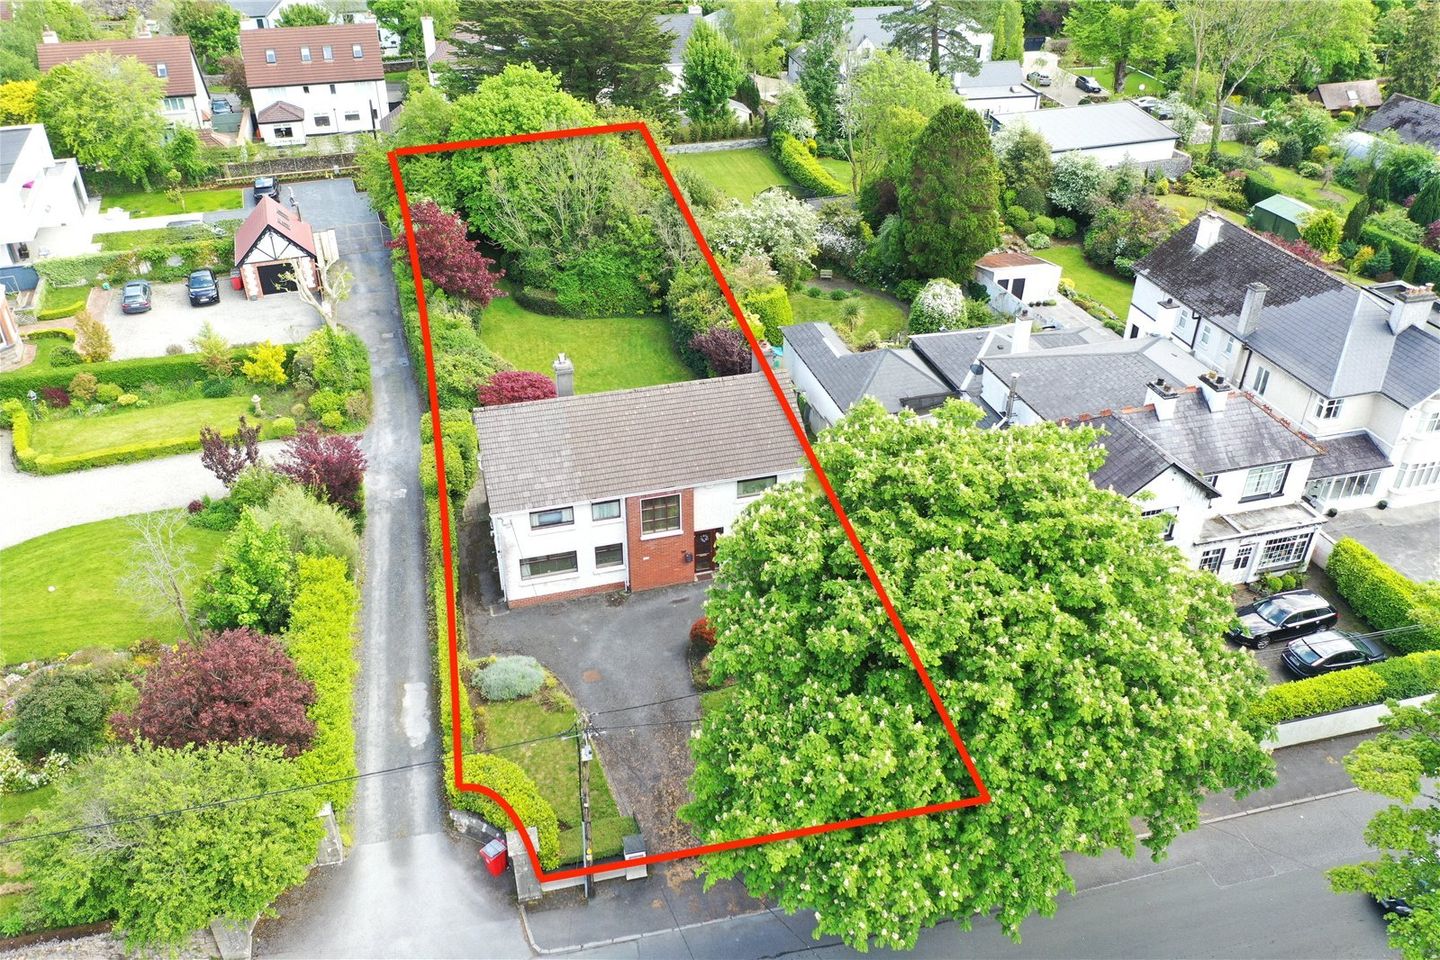 Mulcaire House, Mulcaire House, 14 Maunsells Road, Galway City, Co. Galway